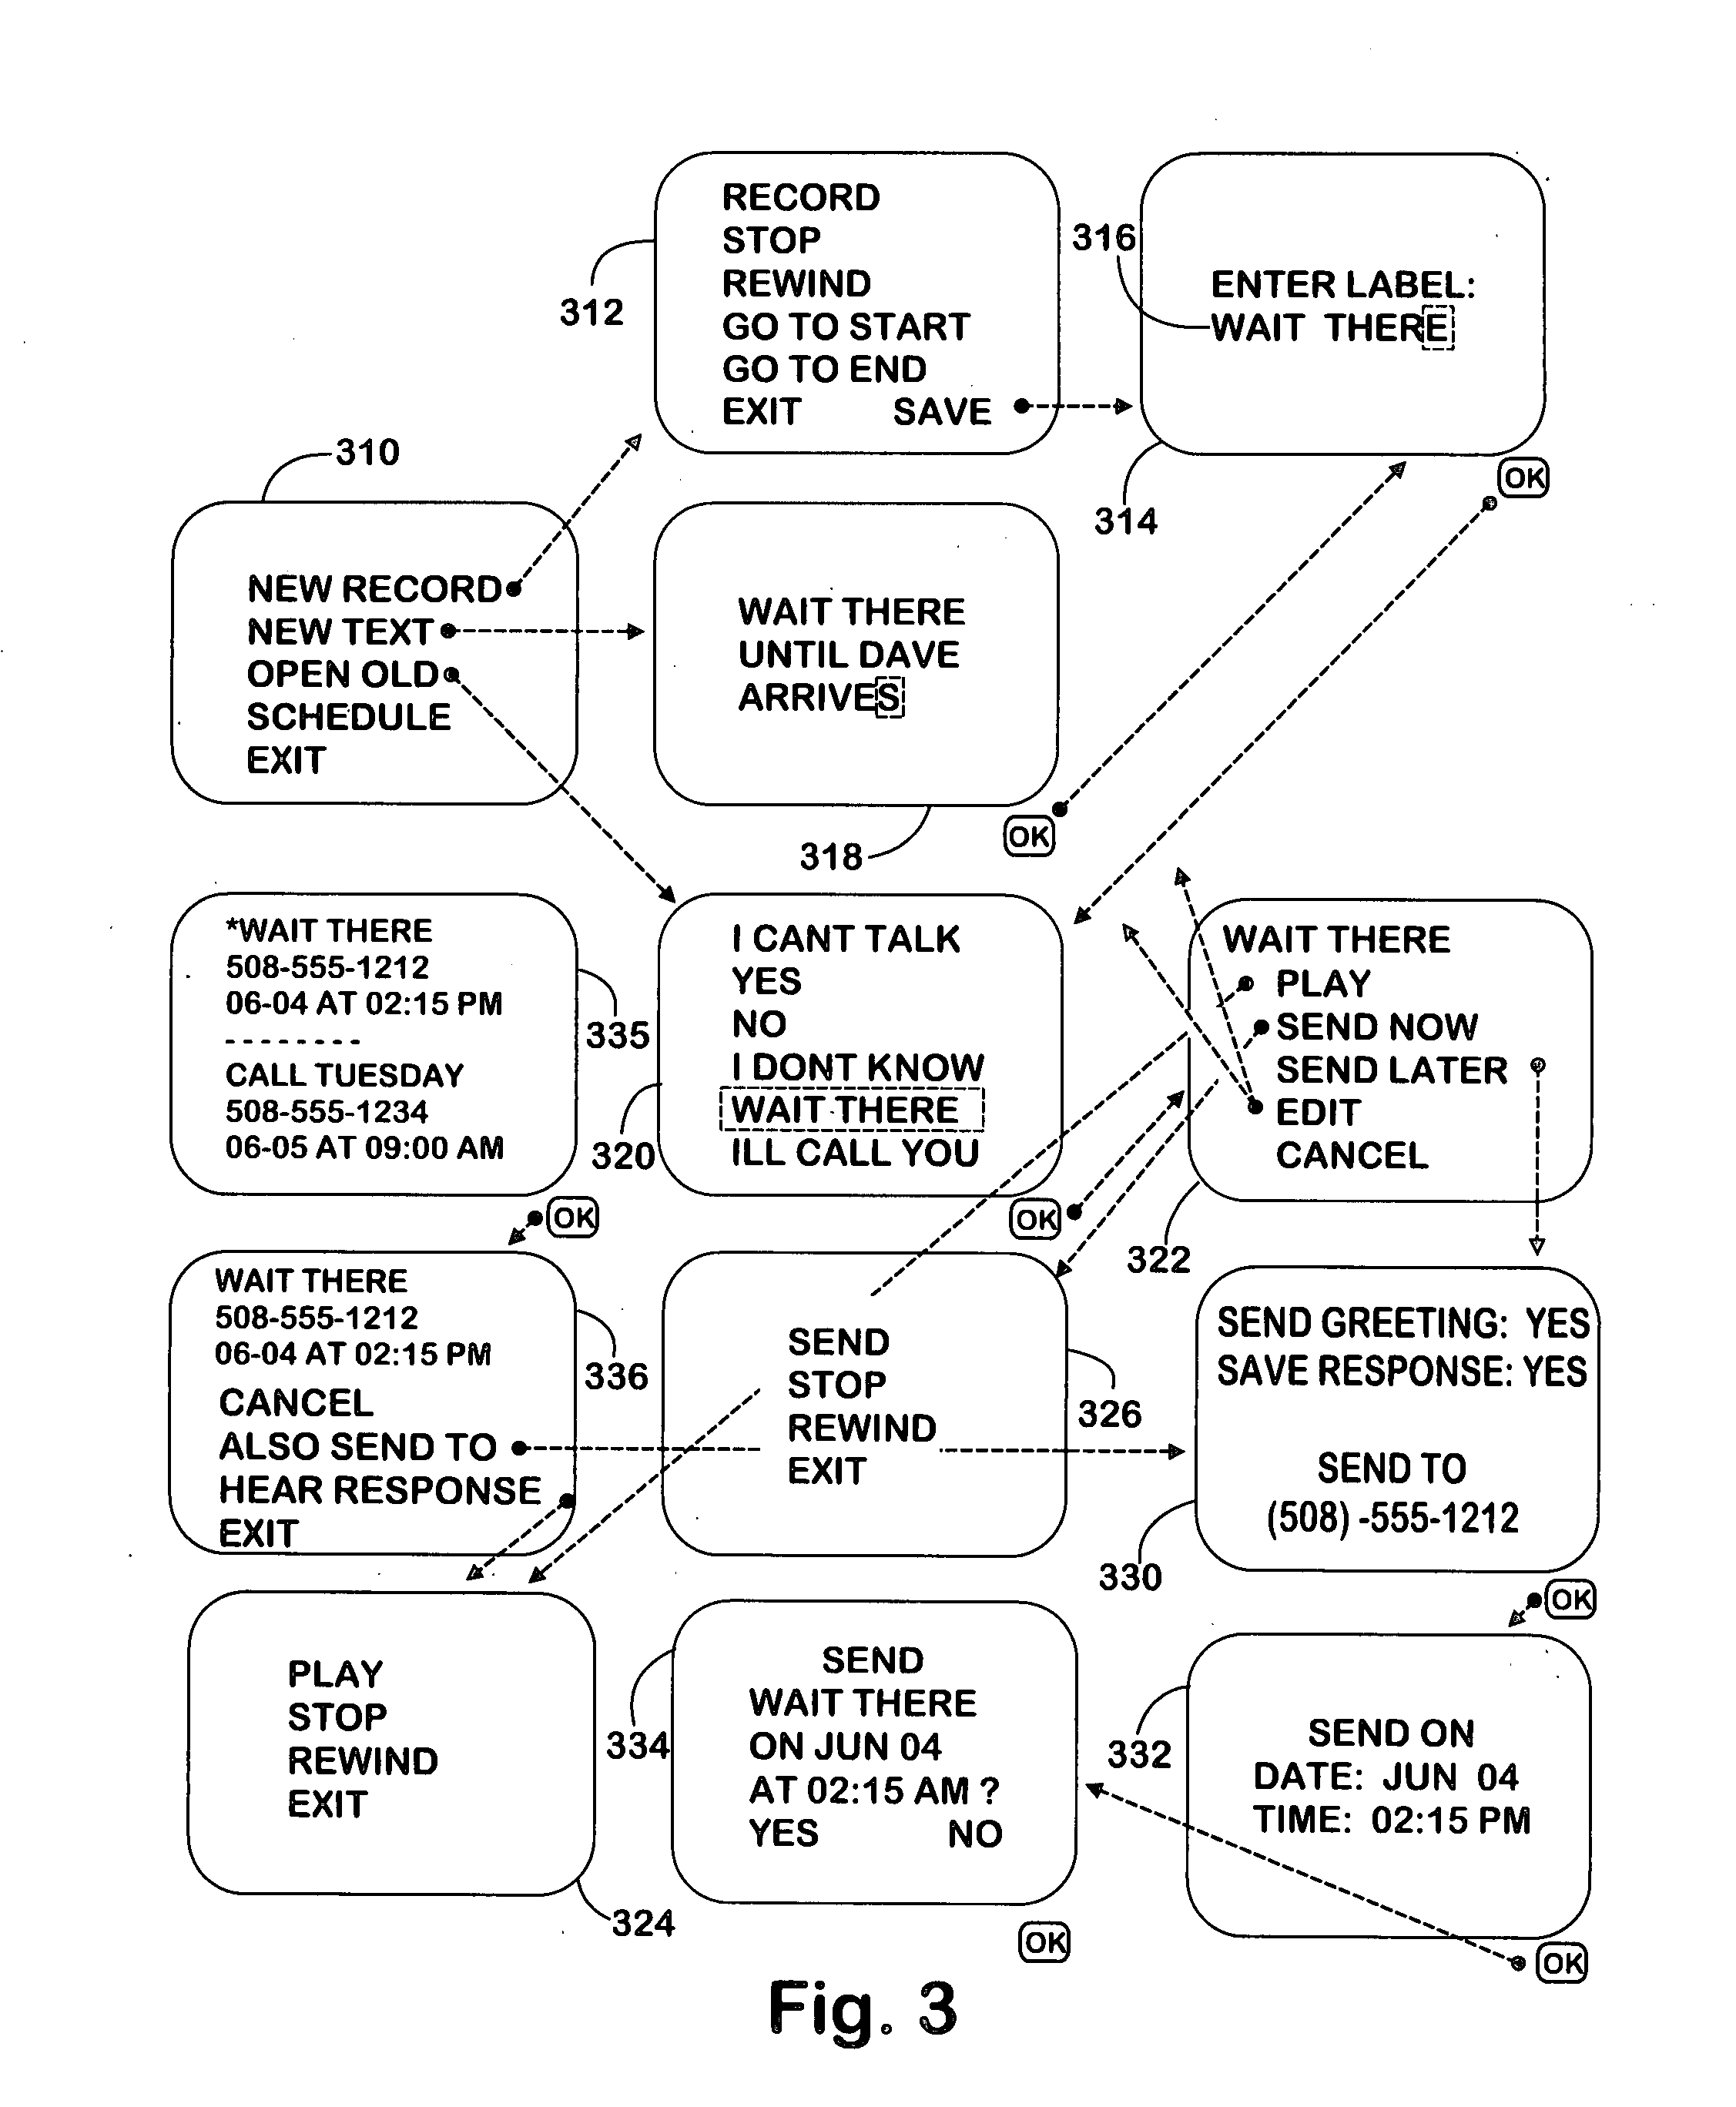 Communication and control system using location aware devices for audio message storage and transmission operating under rule-based control